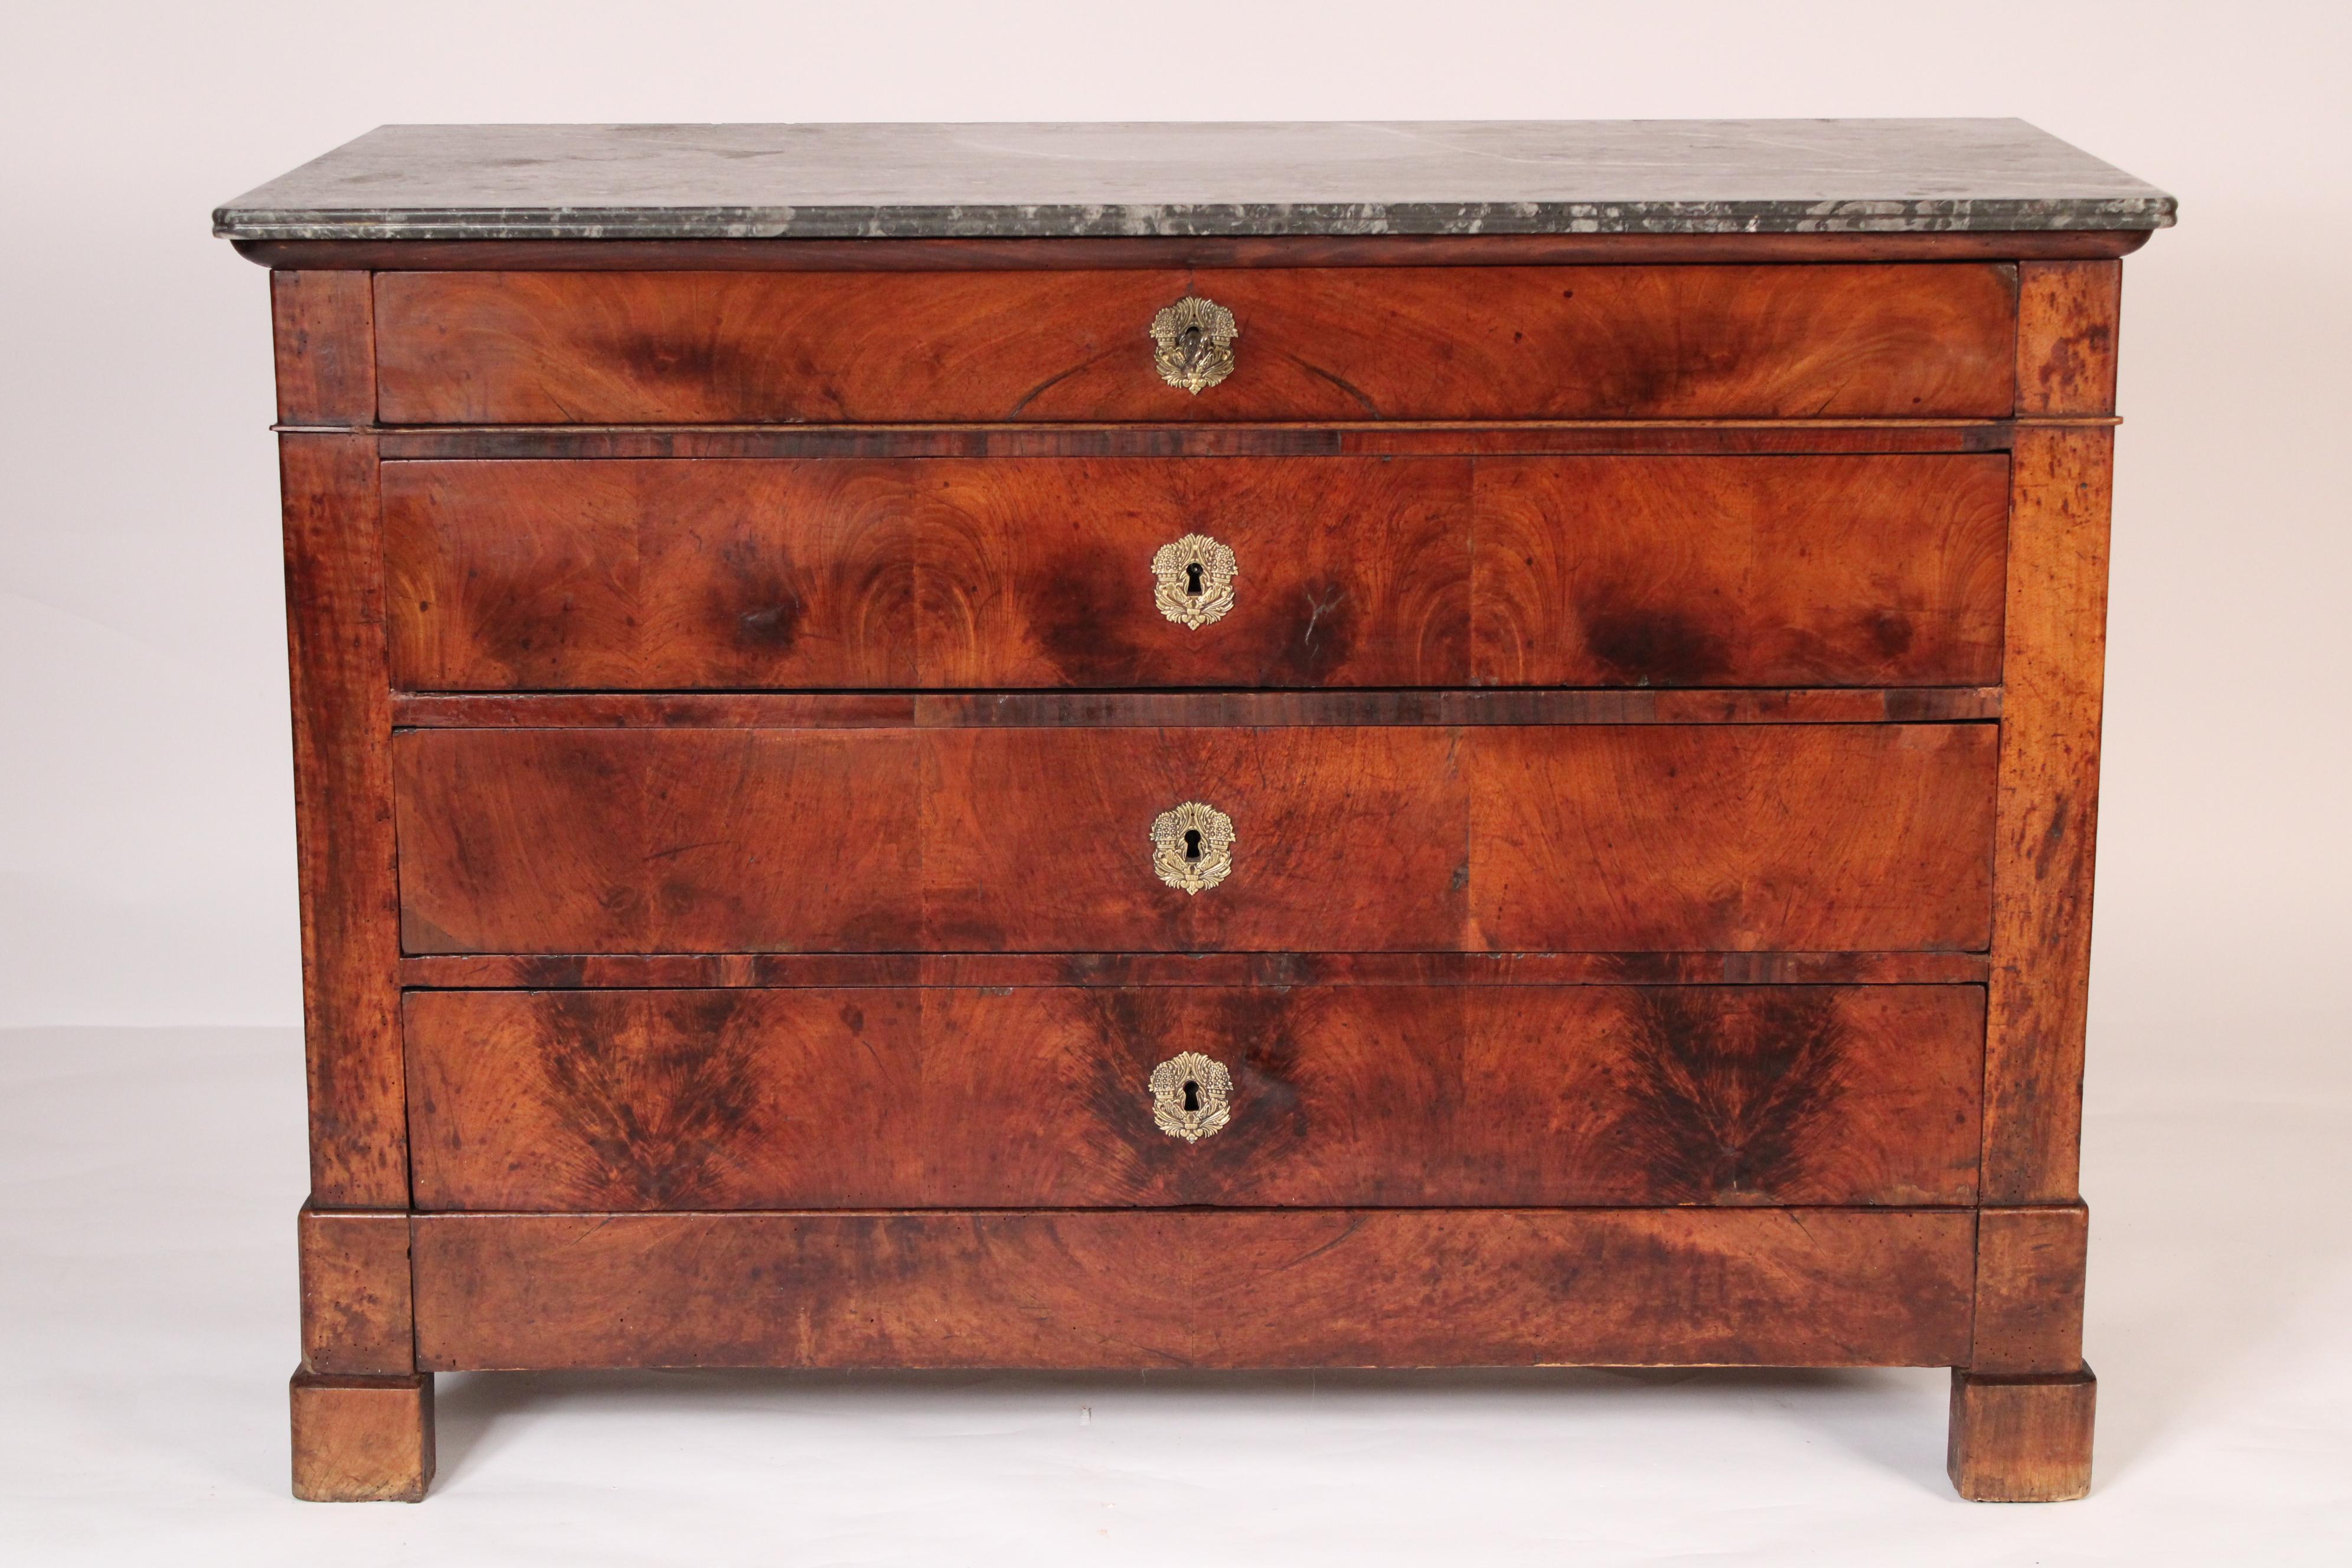 Louis Philippe mahogany and walnut chest of drawers with marble top, 19th century. With a grey and white rectangular marble top with rounded front corners,  below are 4 flame mahogany drawers with gilt bronze escutcheons,  sides are walnut, resting